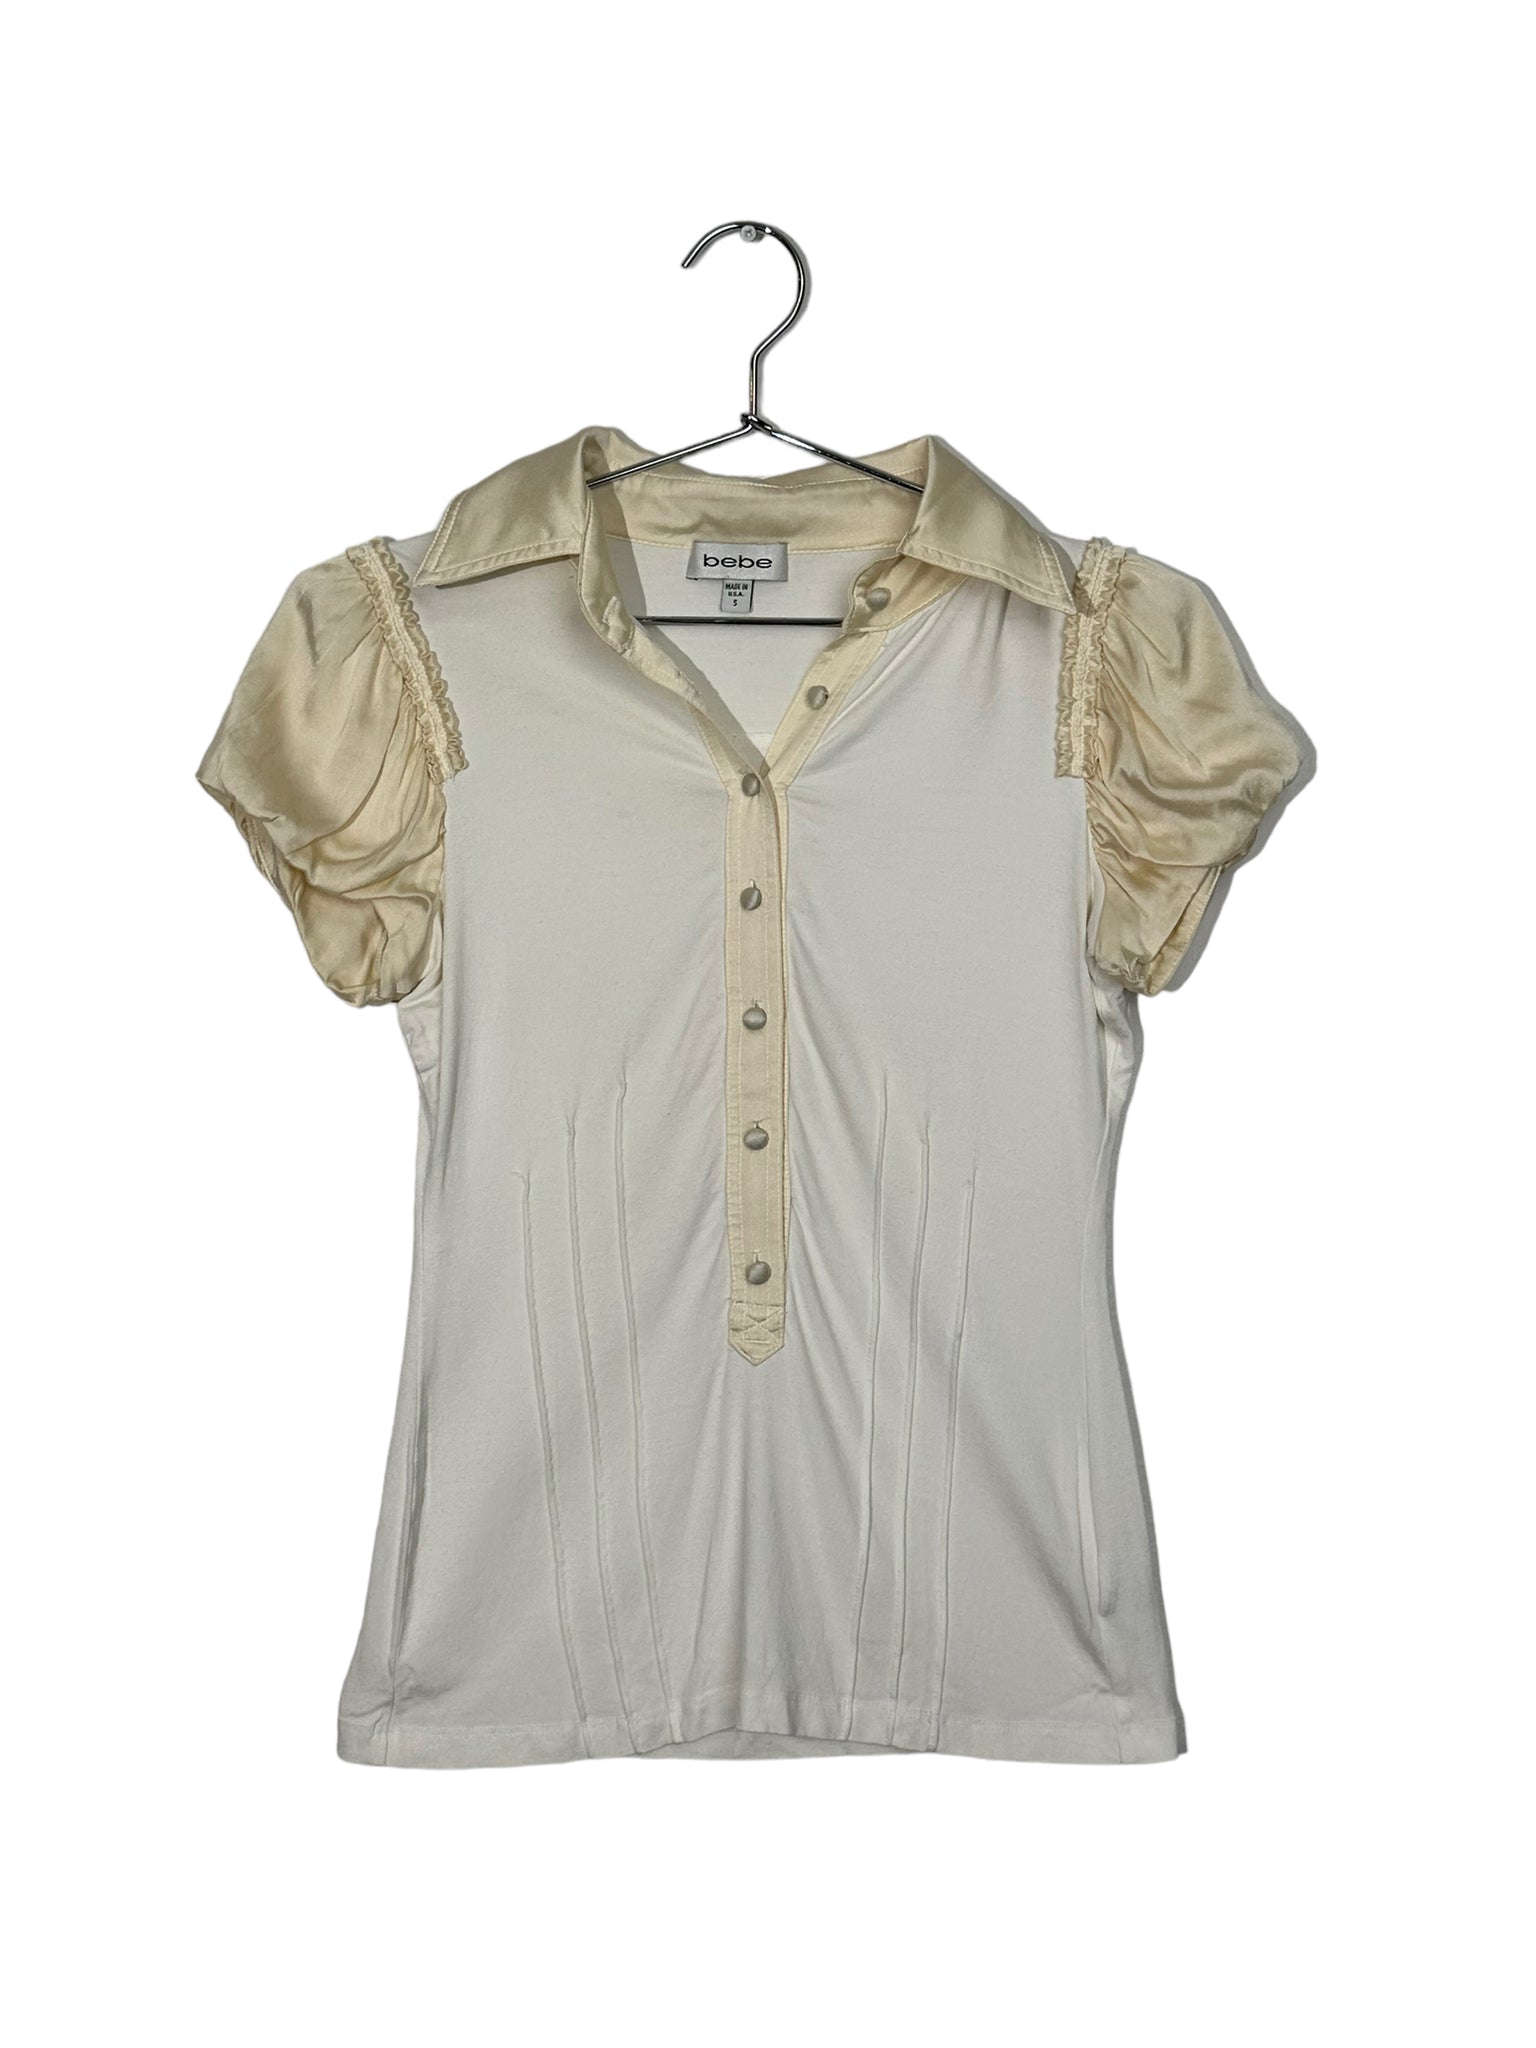 Bebe Cream And White Structured Button Up